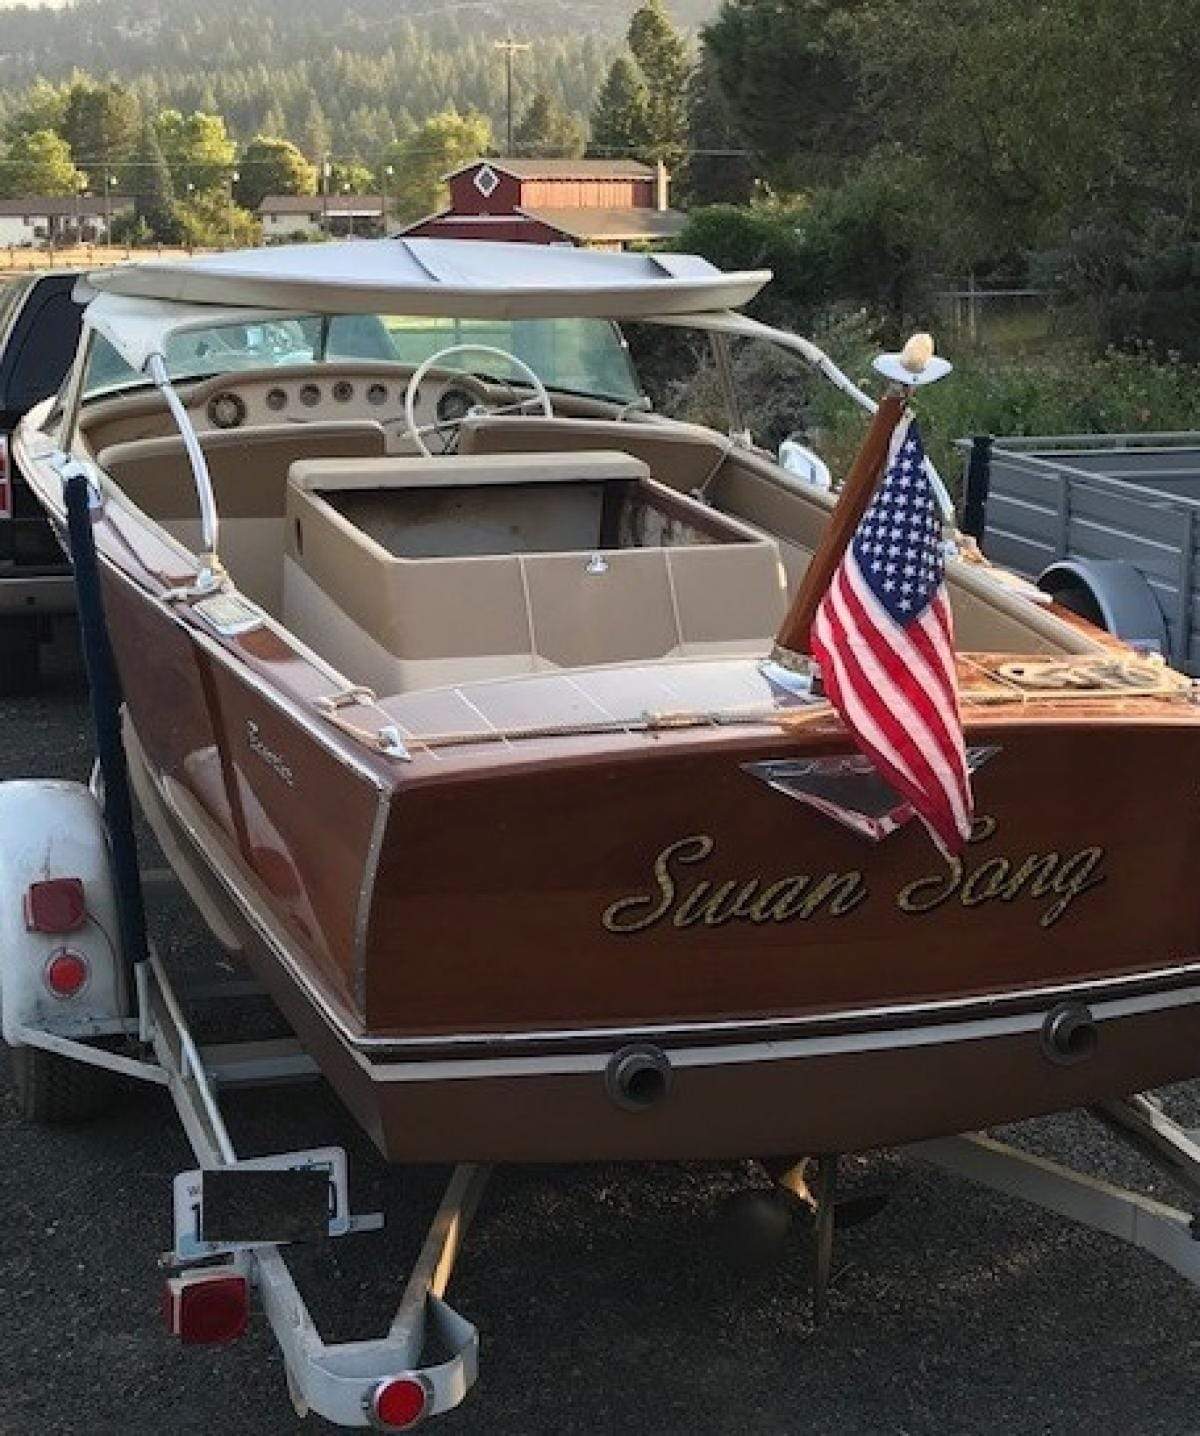 Classic Wooden Boat for Sale -  1957 CENTURY 18' RESORTER